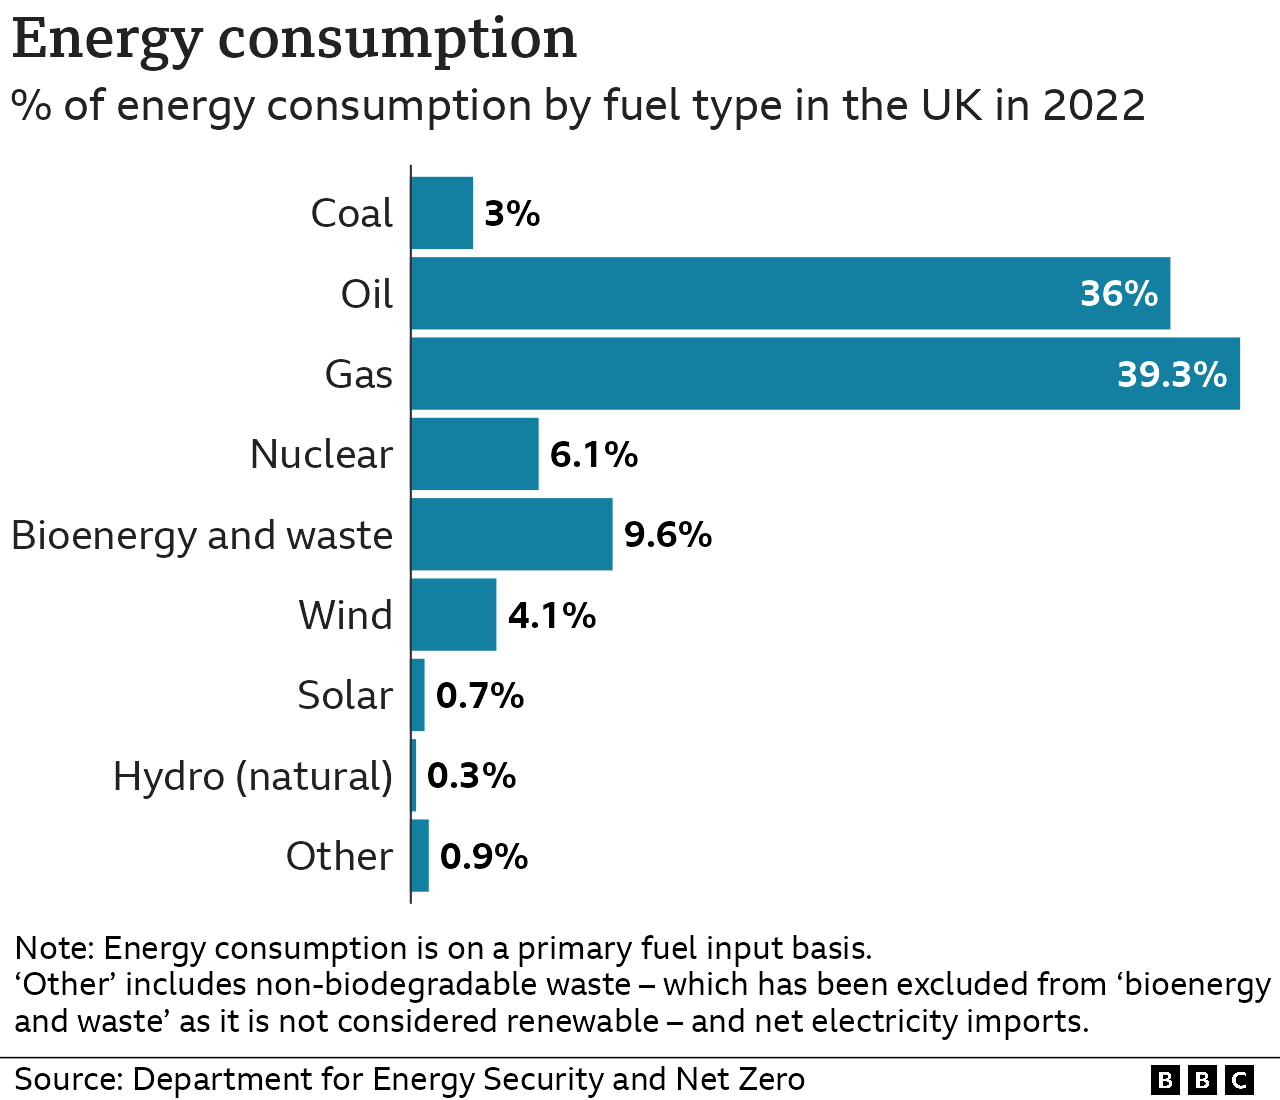 Breakdown of energy consumption in the UK by primary fuel type in 2022: coal 3.0%; oil 36.0%; gas 39.3%, nuclear 6.1%, bioenergy 9.6%, wind 4.1%, solar 0.7%, natural hydropower 0.3%, other 0.9%. Note that "other" includes non-biodegradable waste - which has been excluded from the bioenergy and waste category as it is not considered renewable - and net electricity imports. Source: Department for Energy Security and Net Zero. [October 2023]